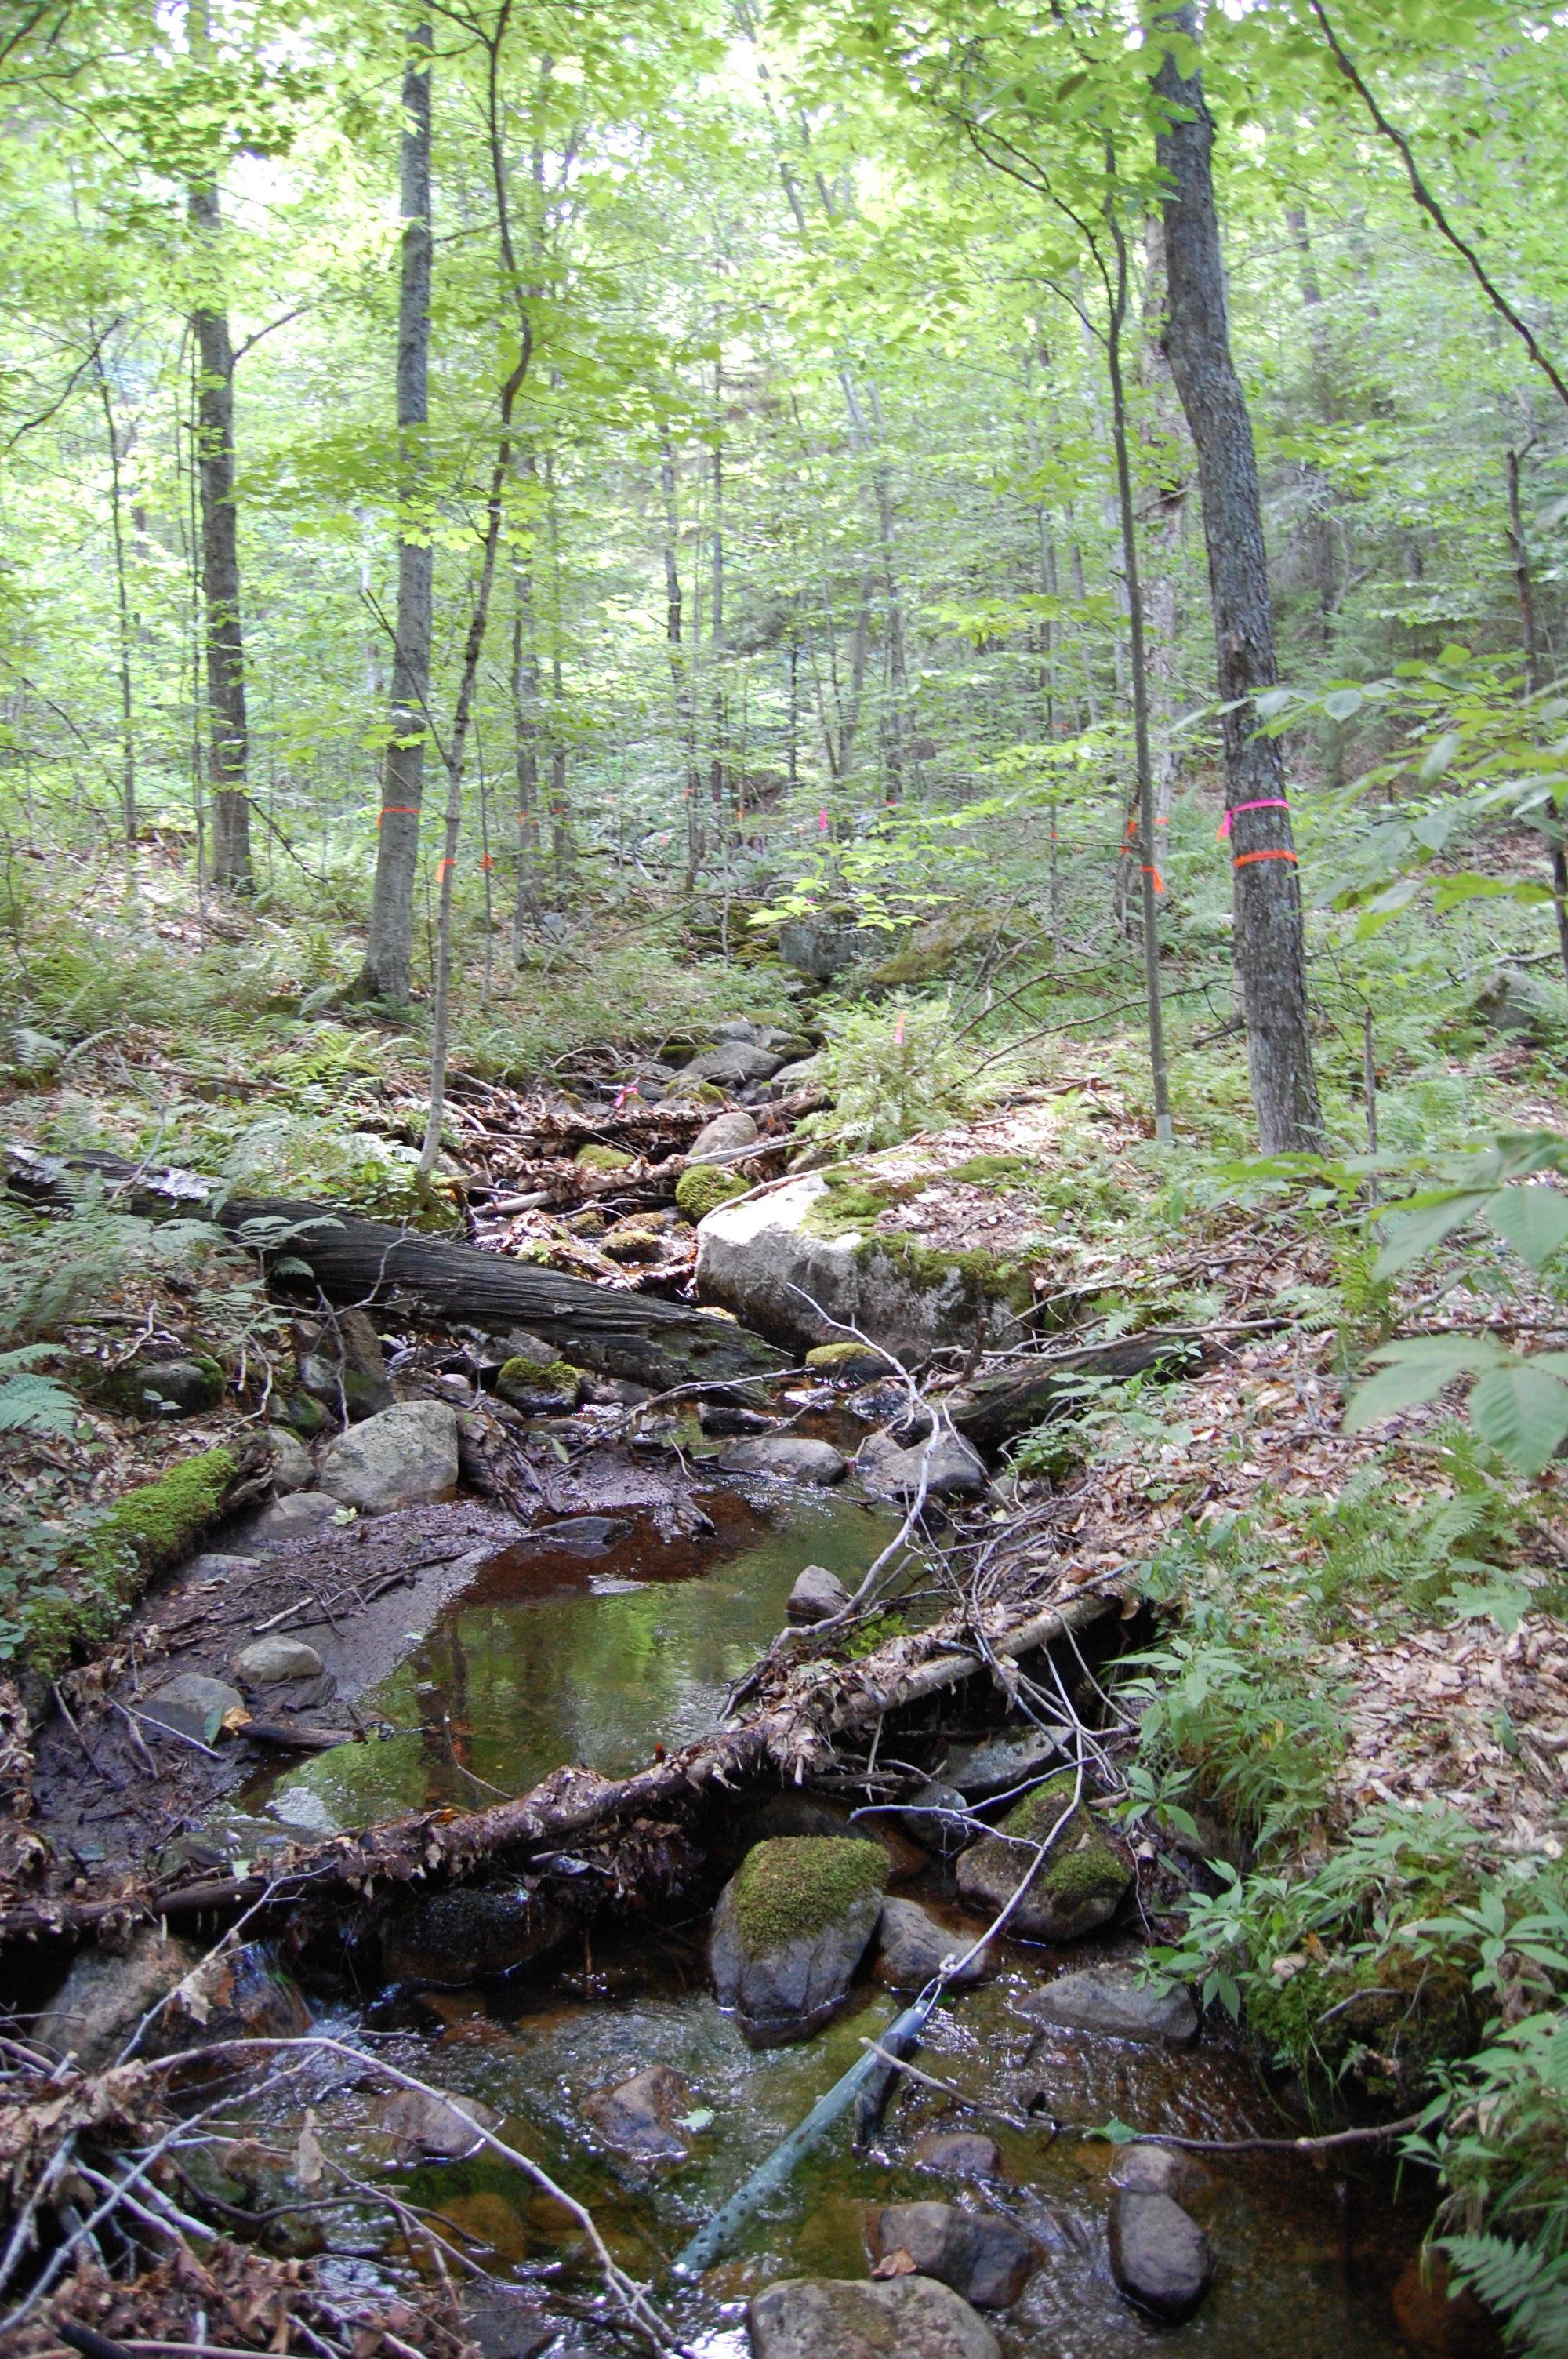 Energy flow between stream and forest | Oikos Journal